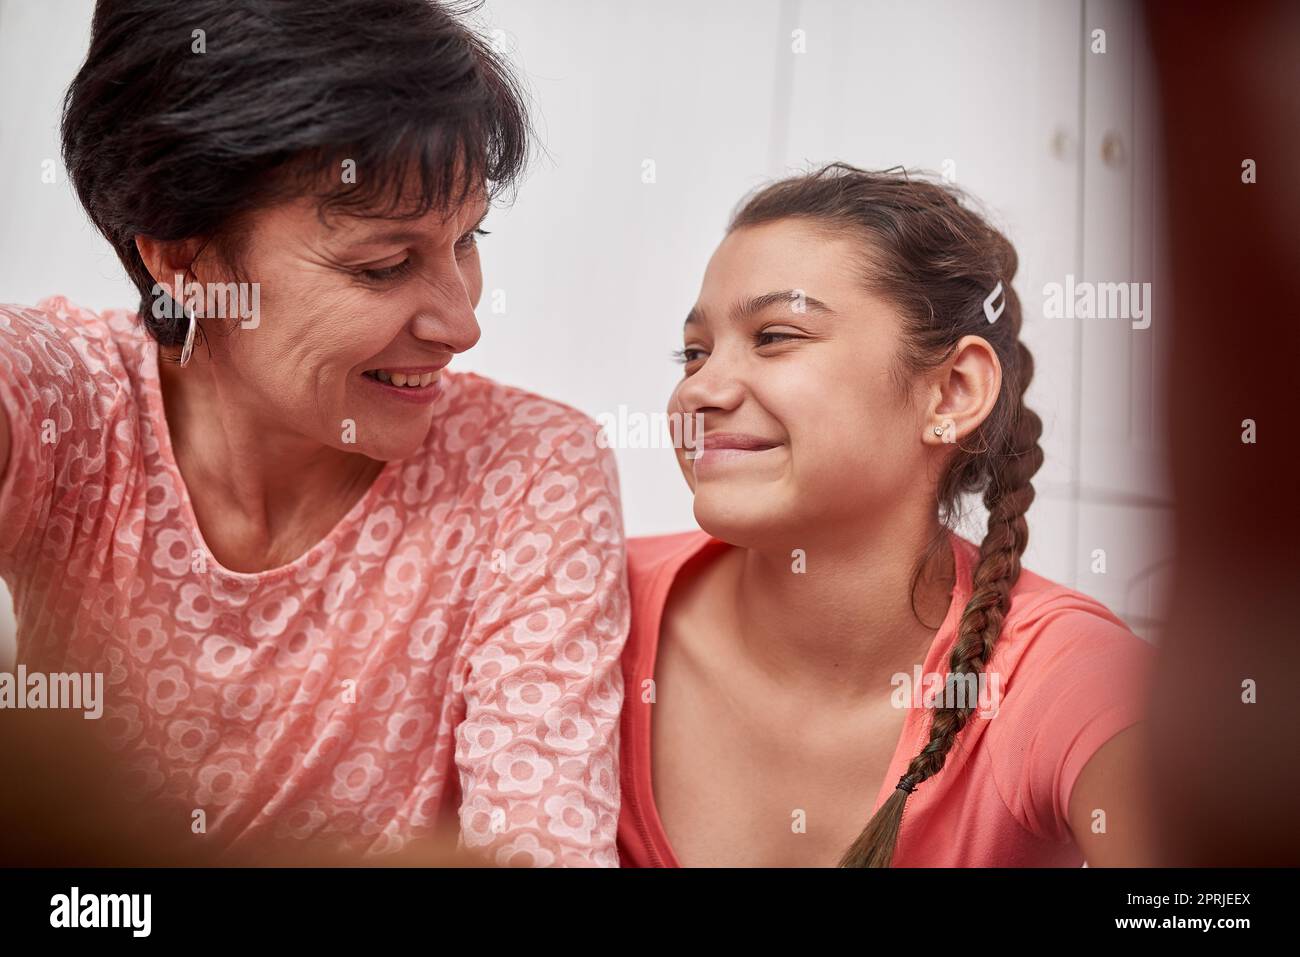 They share a special bond. a mother and daughter smiling at each other. Stock Photo